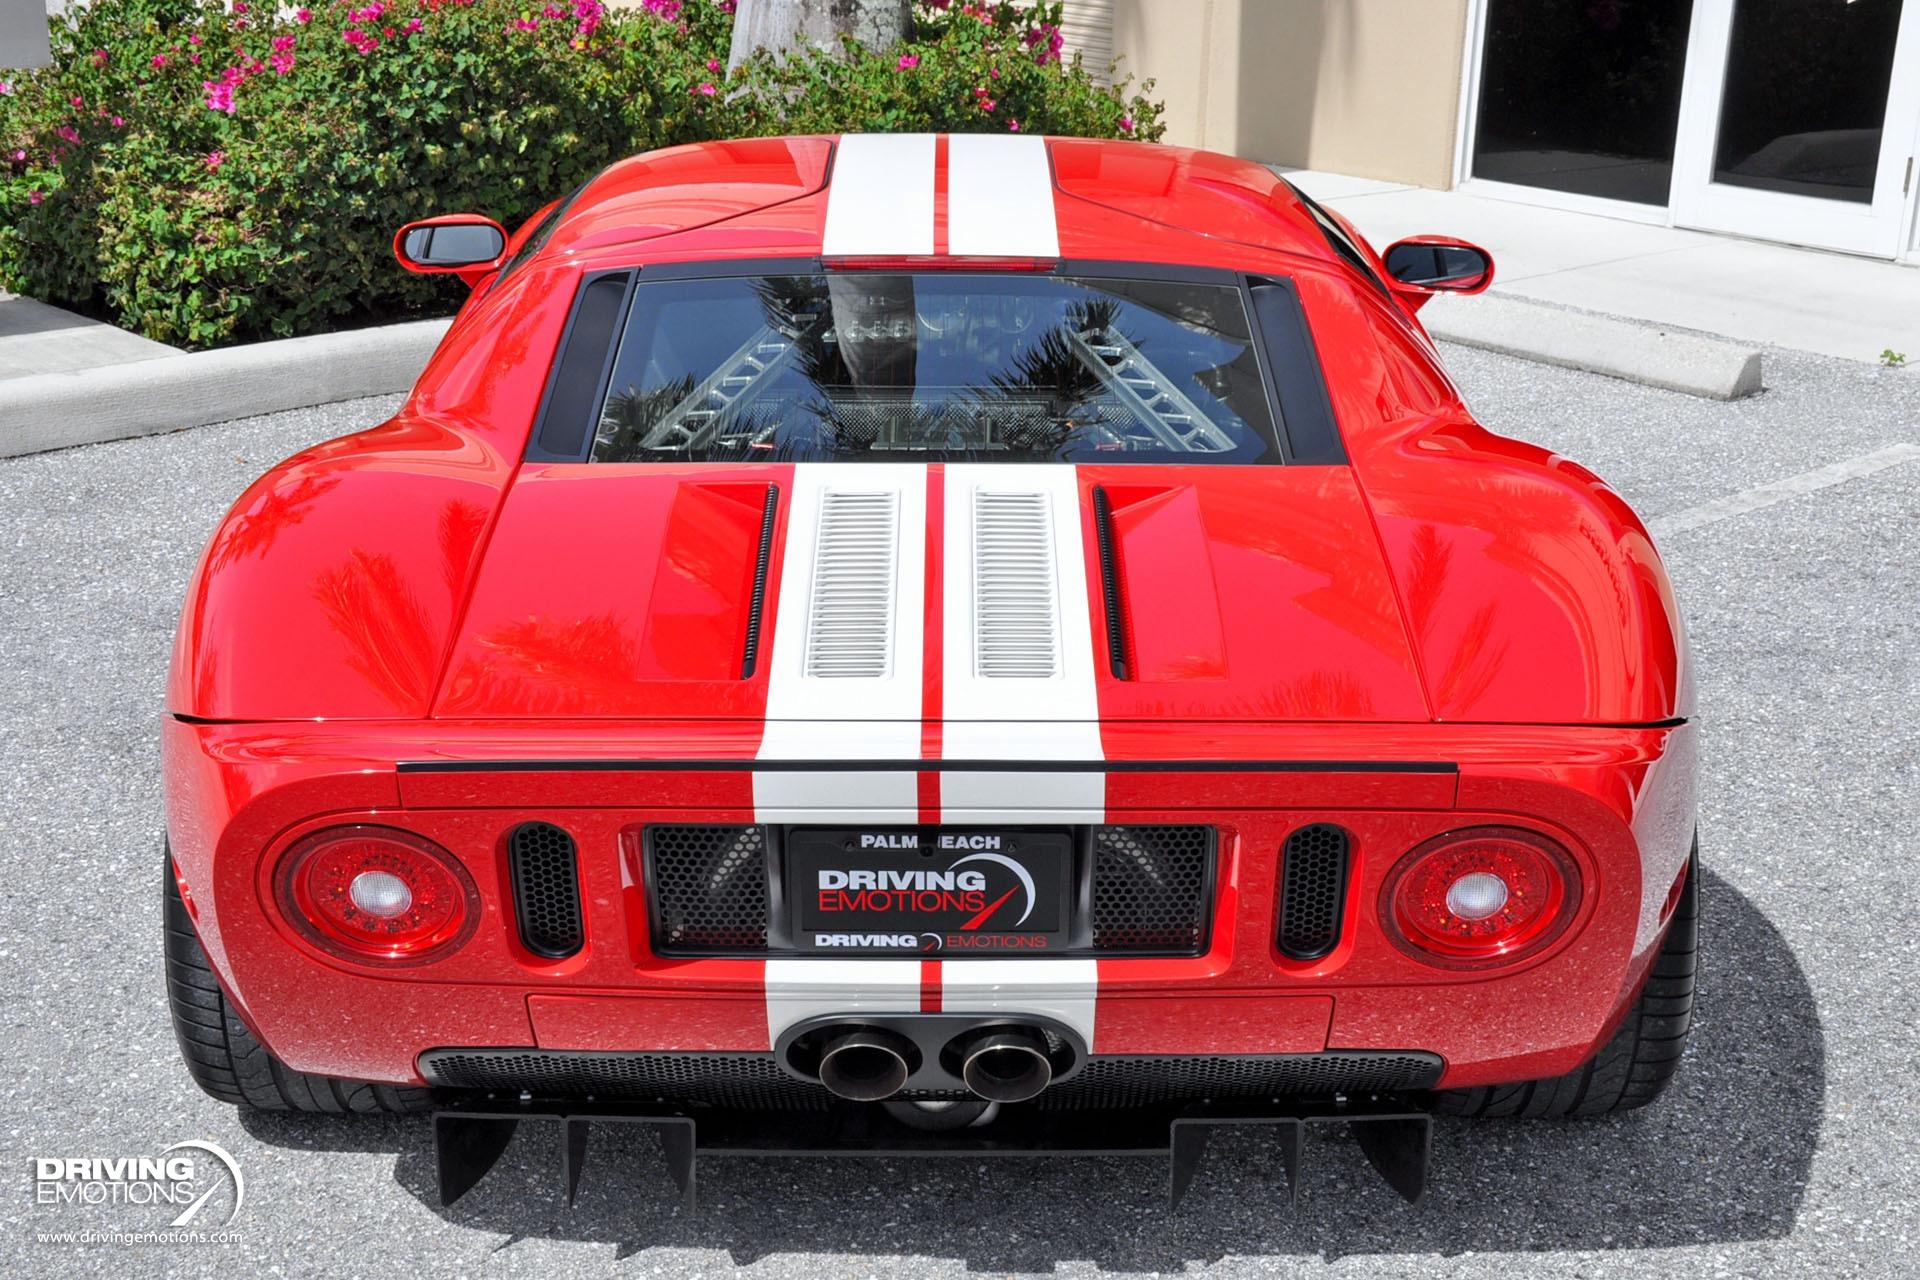 Used 2006 Ford GT HEFFNER TWIN TURBO! RARE!! | Lake Park, FL